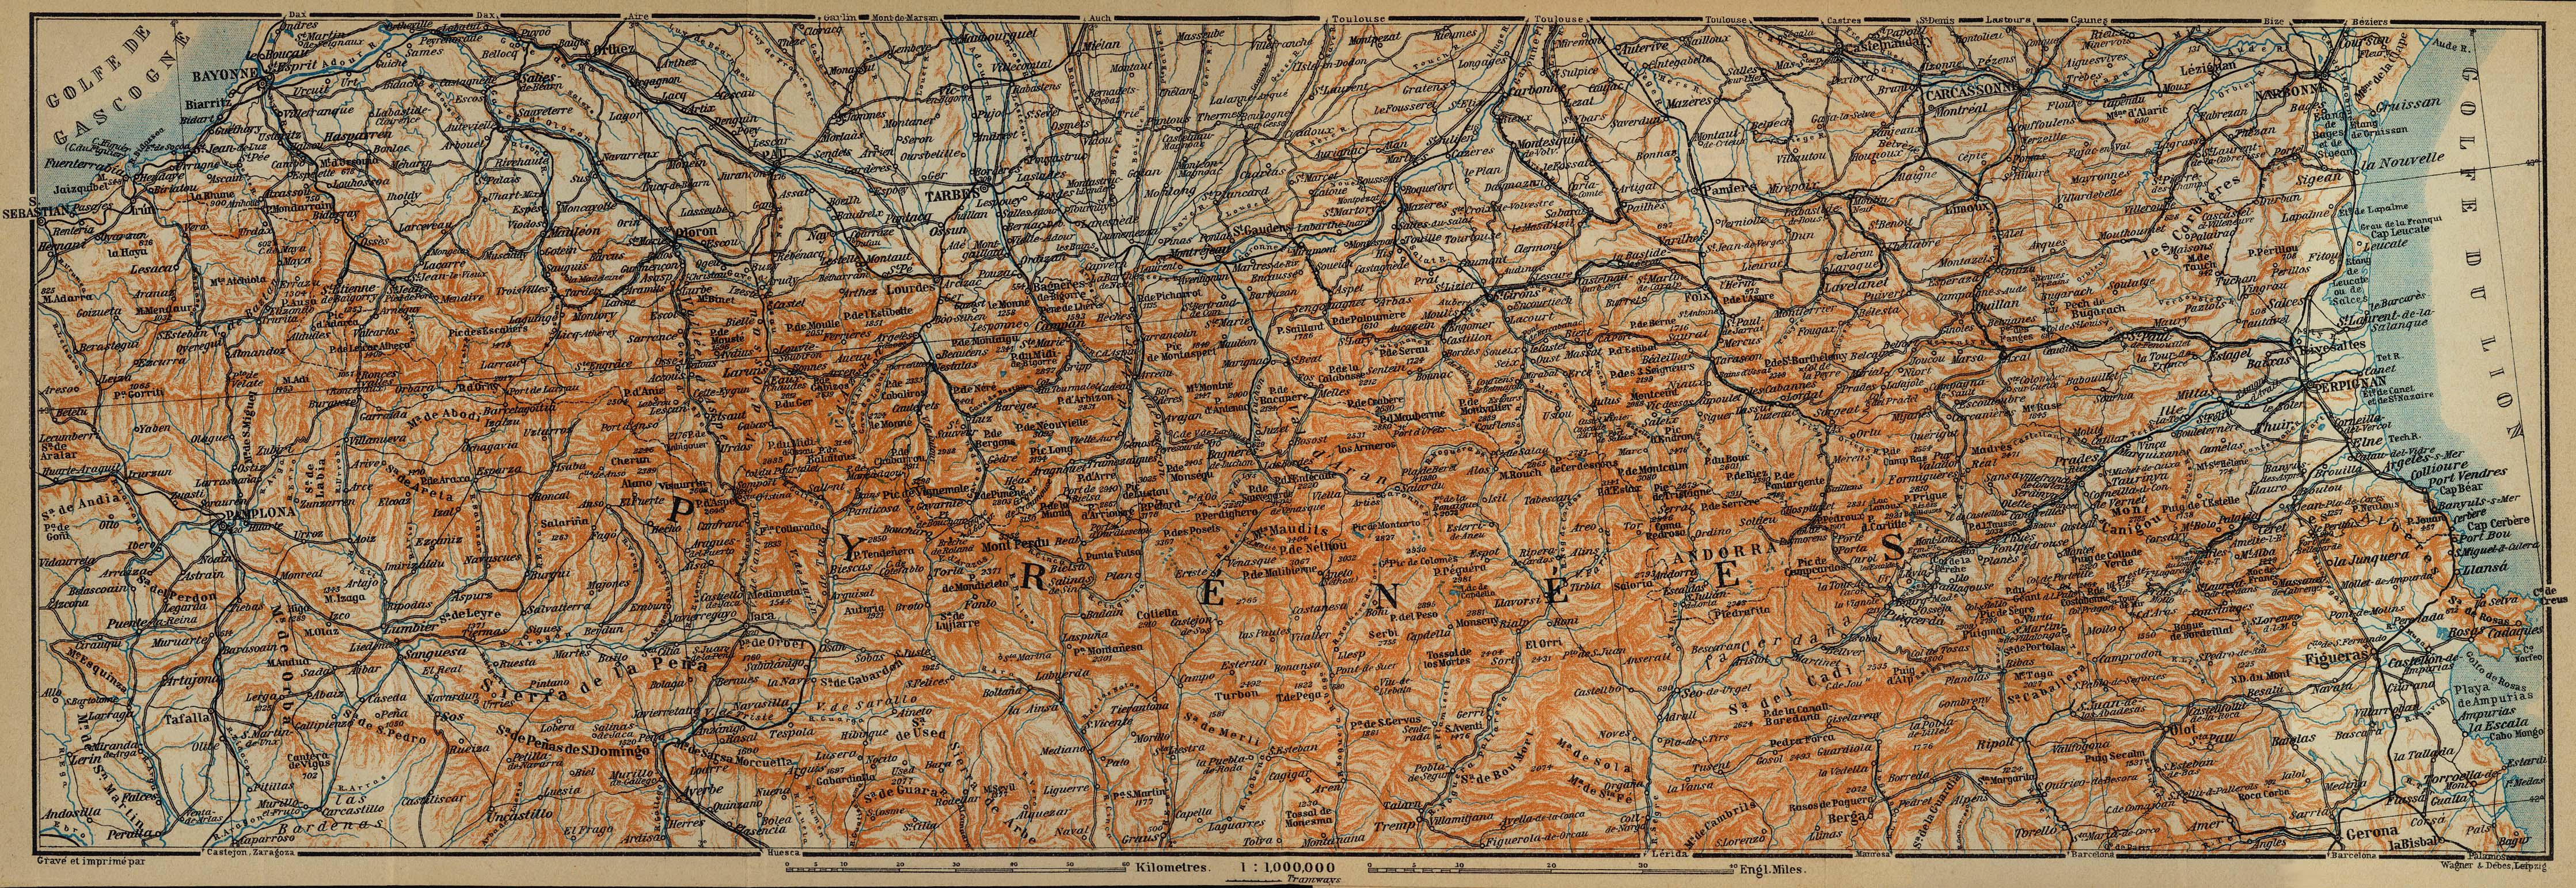 1914 Map of The Pyrenees